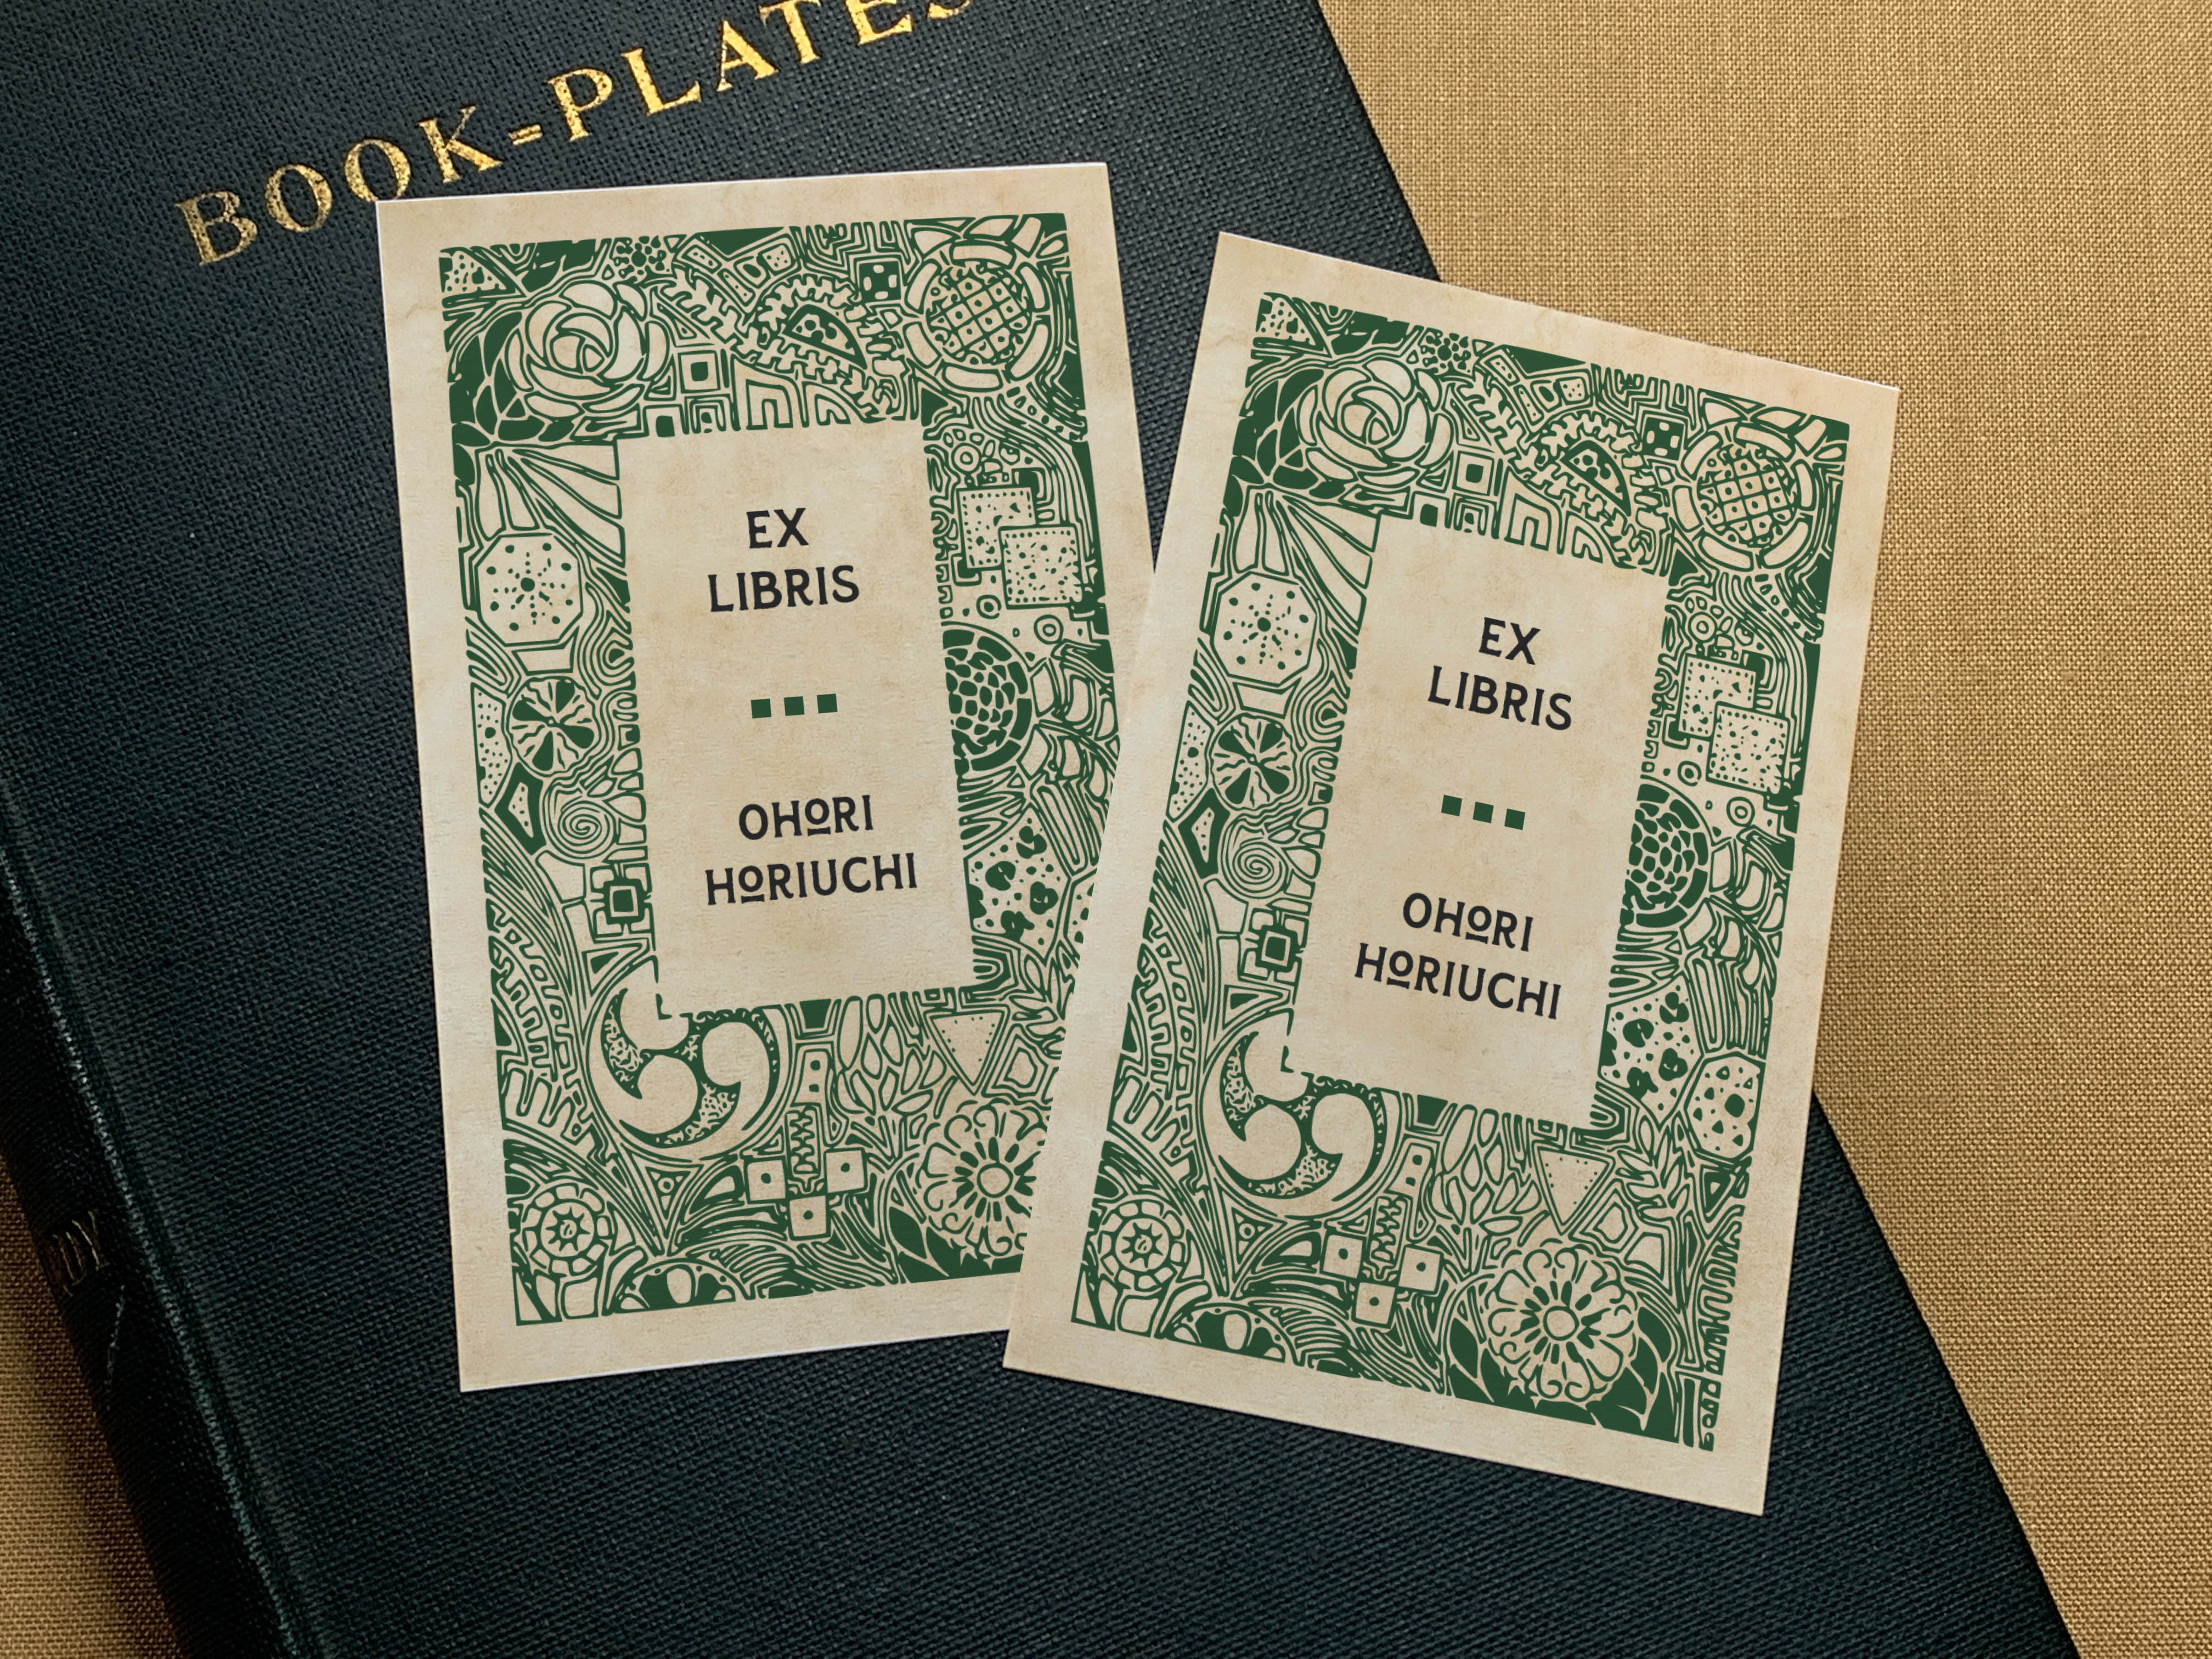 Mitsudomoe Woodcut, Personalized Ex-Libris Bookplates, Crafted on Traditional Gummed Paper, 2.5in x 4in, Set of 30